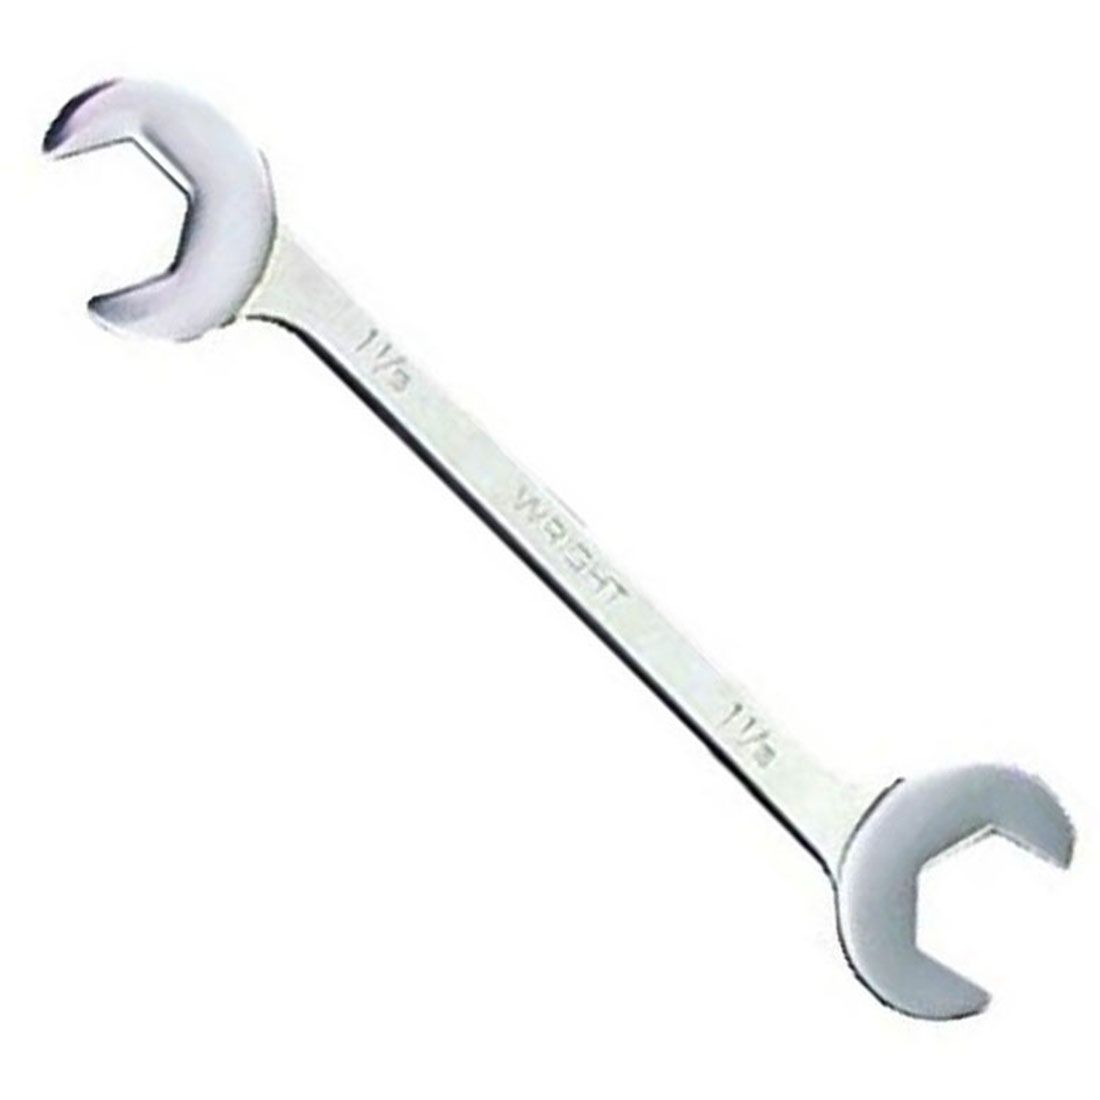 Wright Tool 1386 Double Angle Open End Wrench 1-1/4 x 1-1/4